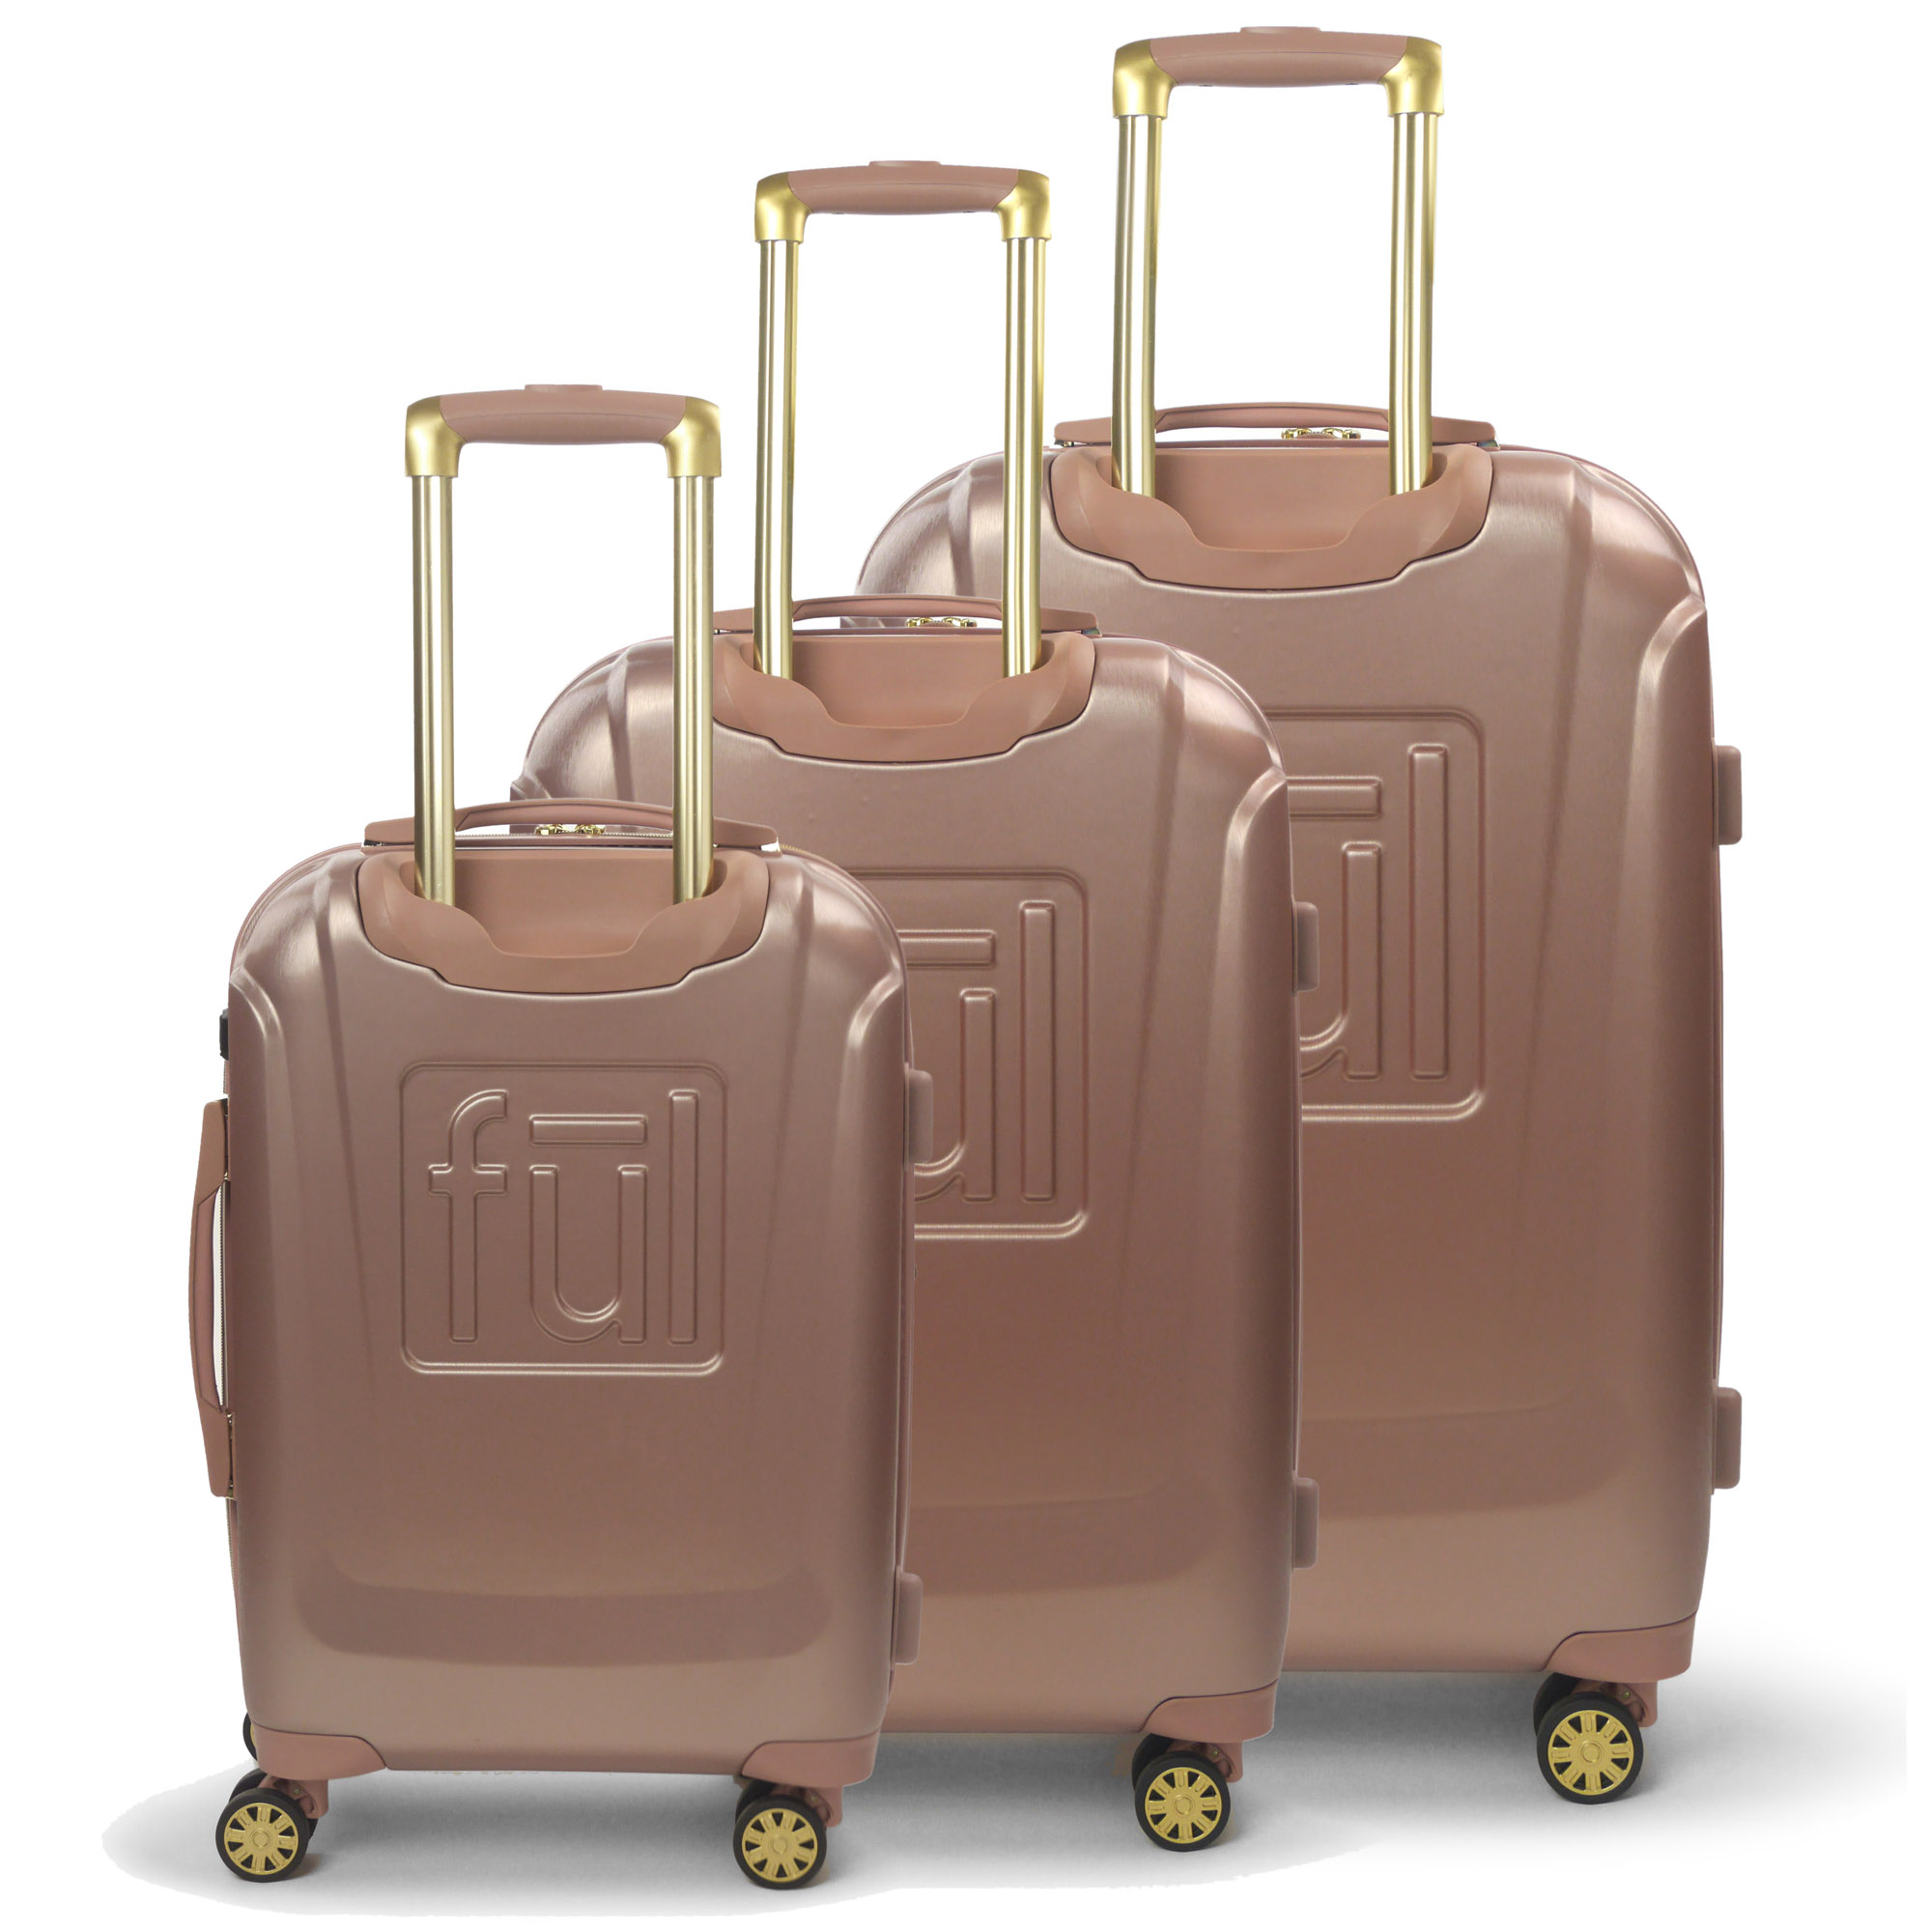 FUL Disney Textured Mickey Mouse Hard Sided 3 Piece Luggage Set, Rose Gold, 29", 25", and 21" Suitcases - image 3 of 11